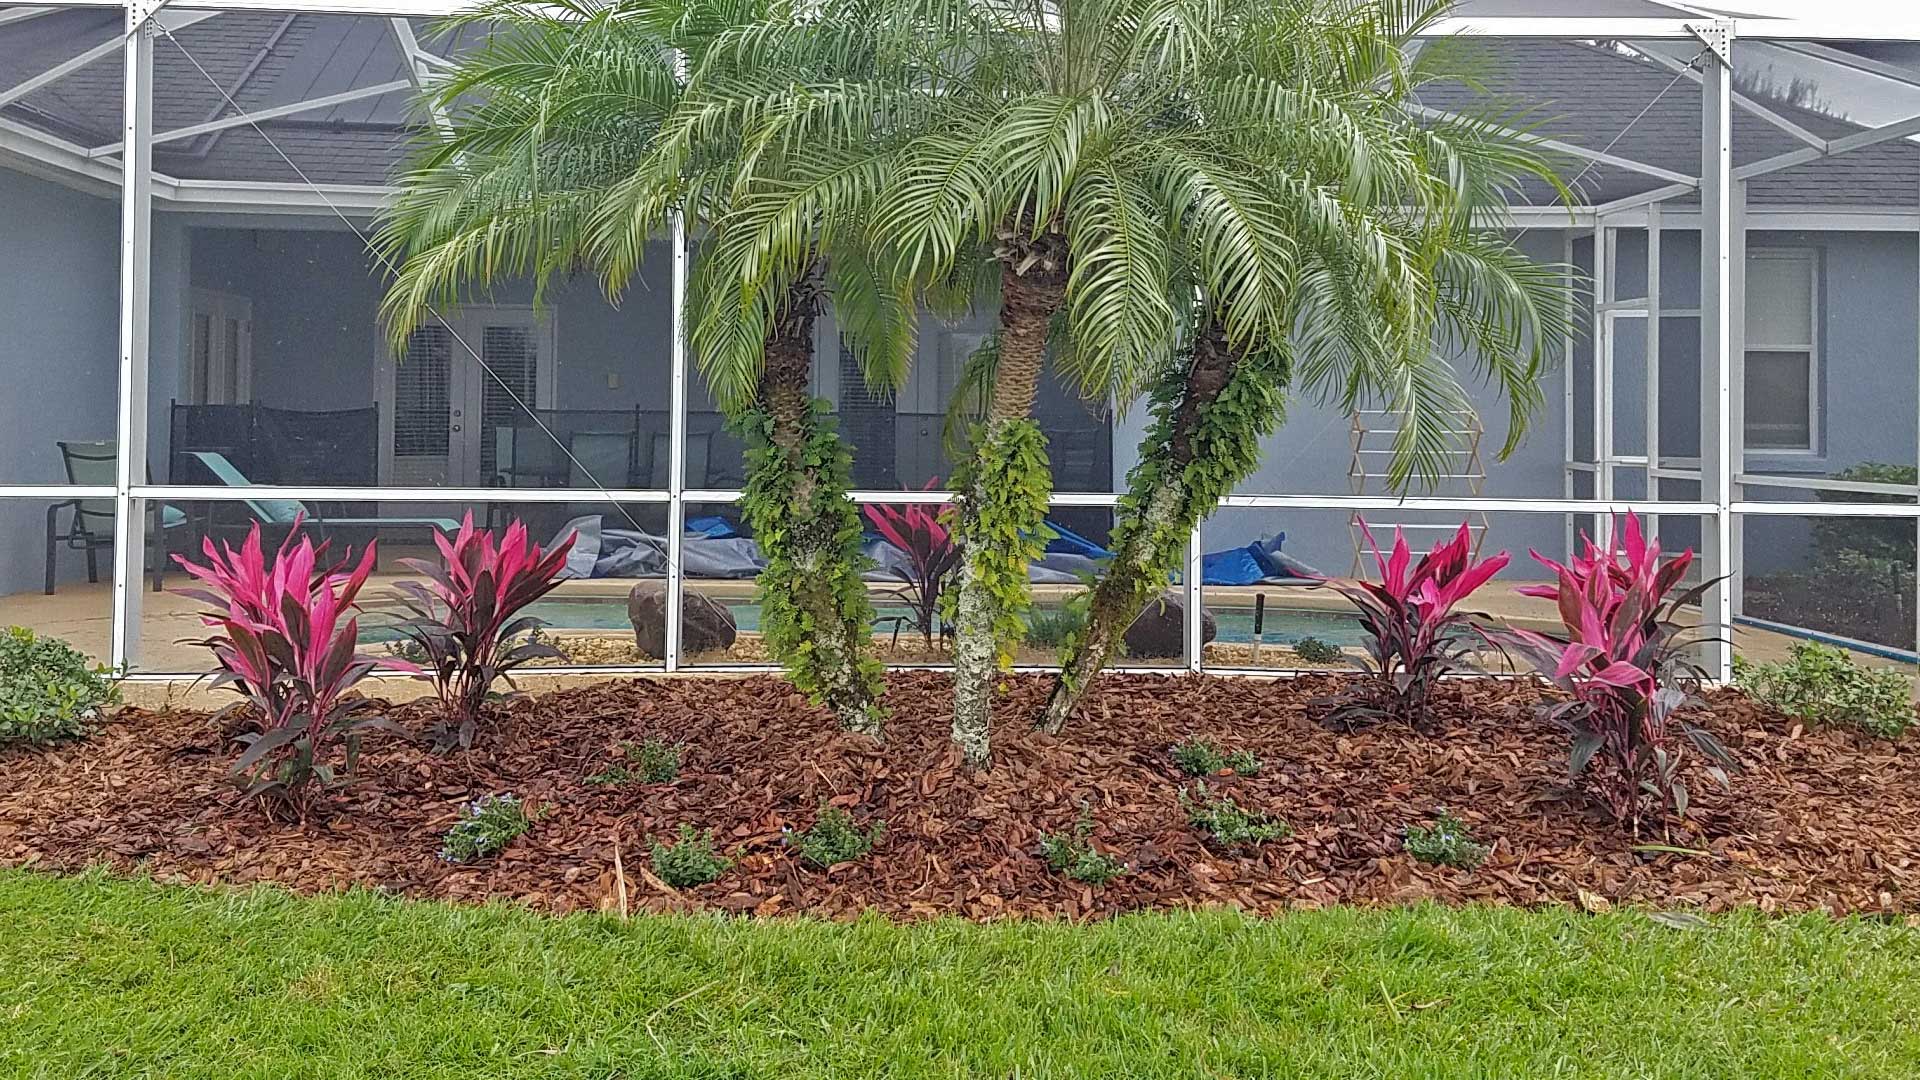 Beautiful landscaping project at a home in Lakeland, FL.